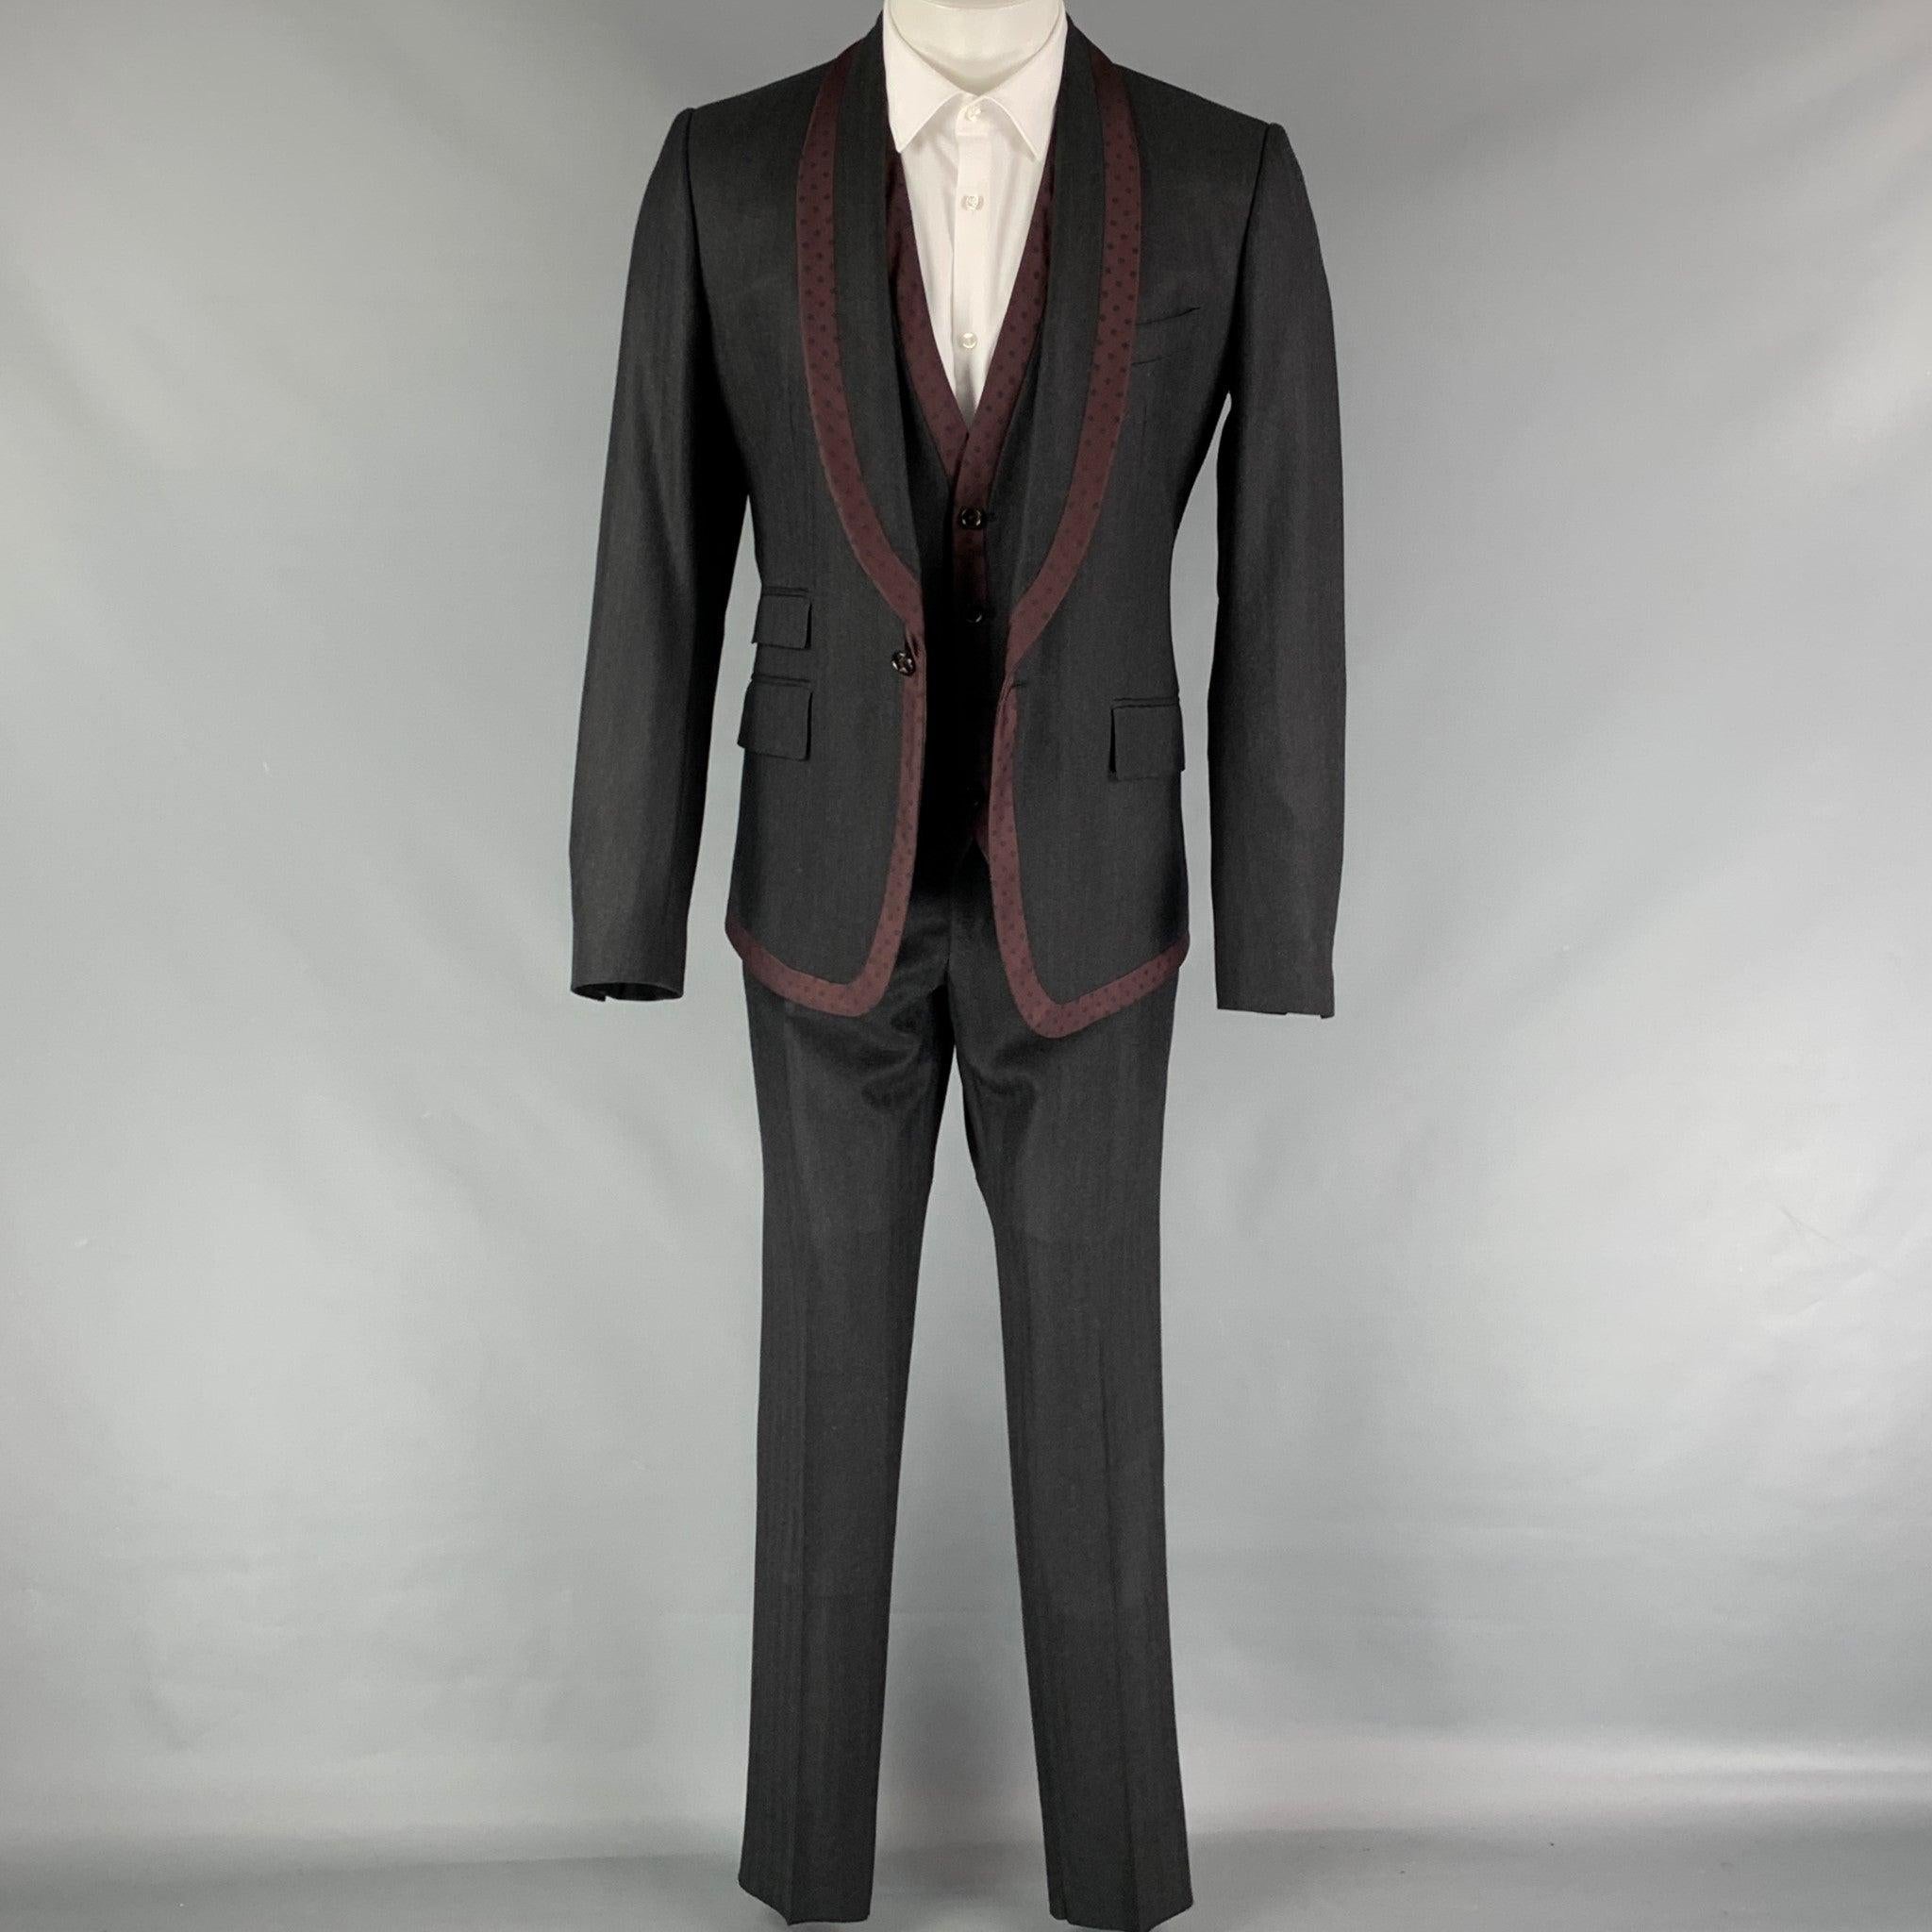 DOLCE & GABBANA Size 38 Grey Burgundy Polka Dot Virgin Wool 3 Piece Suit In Good Condition For Sale In San Francisco, CA